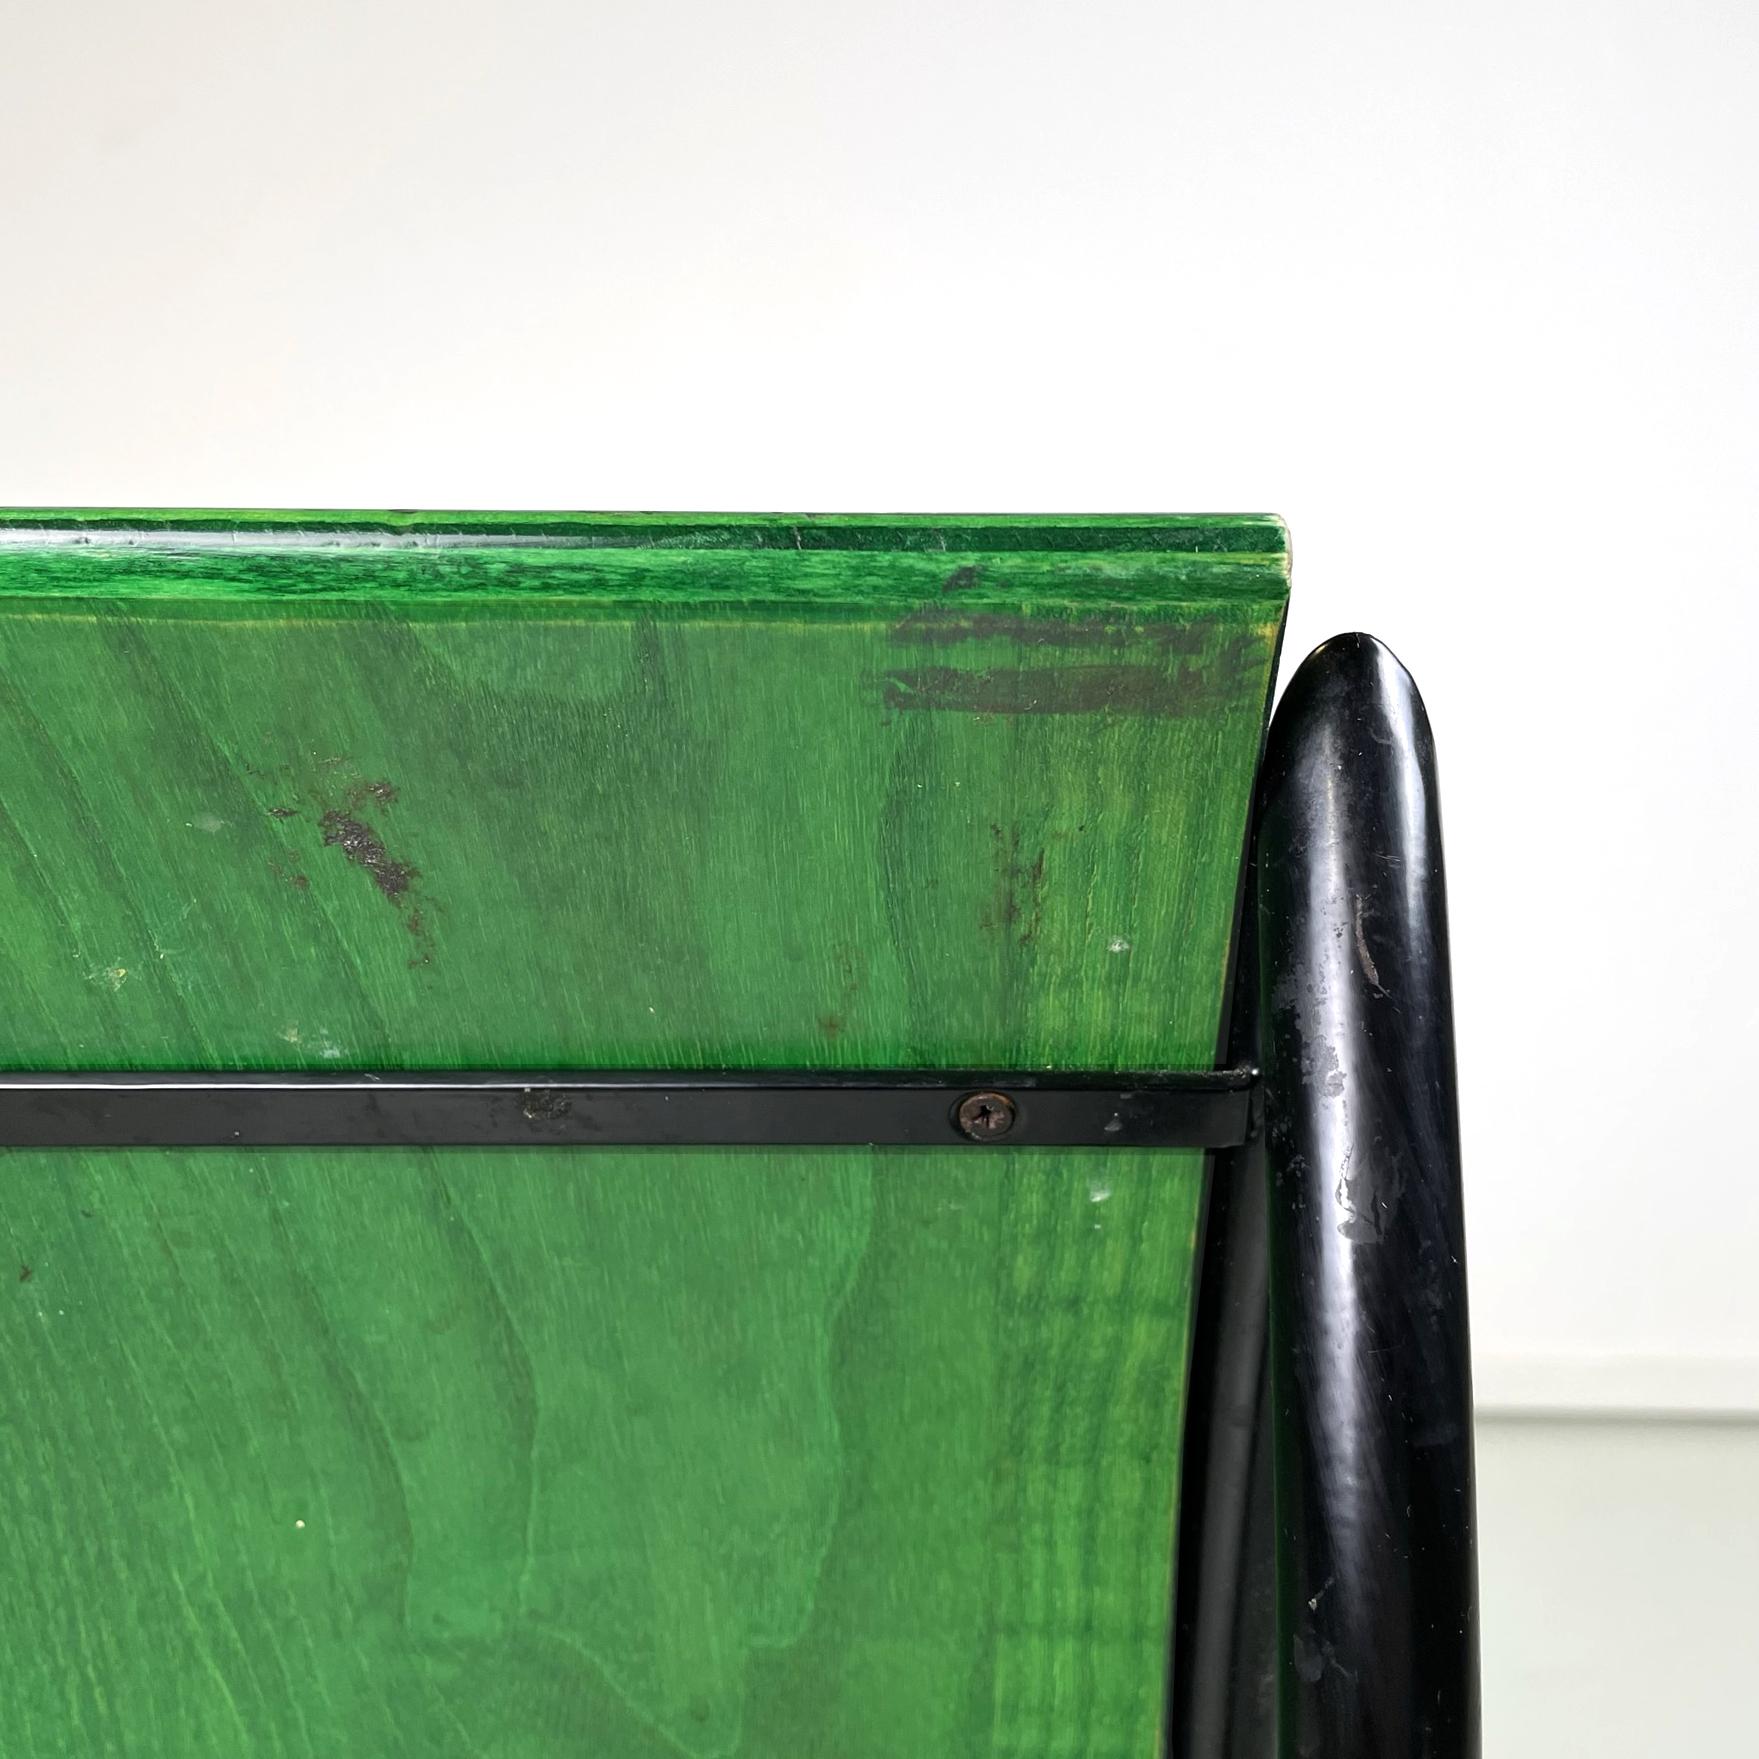 Italian modern Green wood black metal chair Kim by De Lucchi for Memphis, 1980s For Sale 10